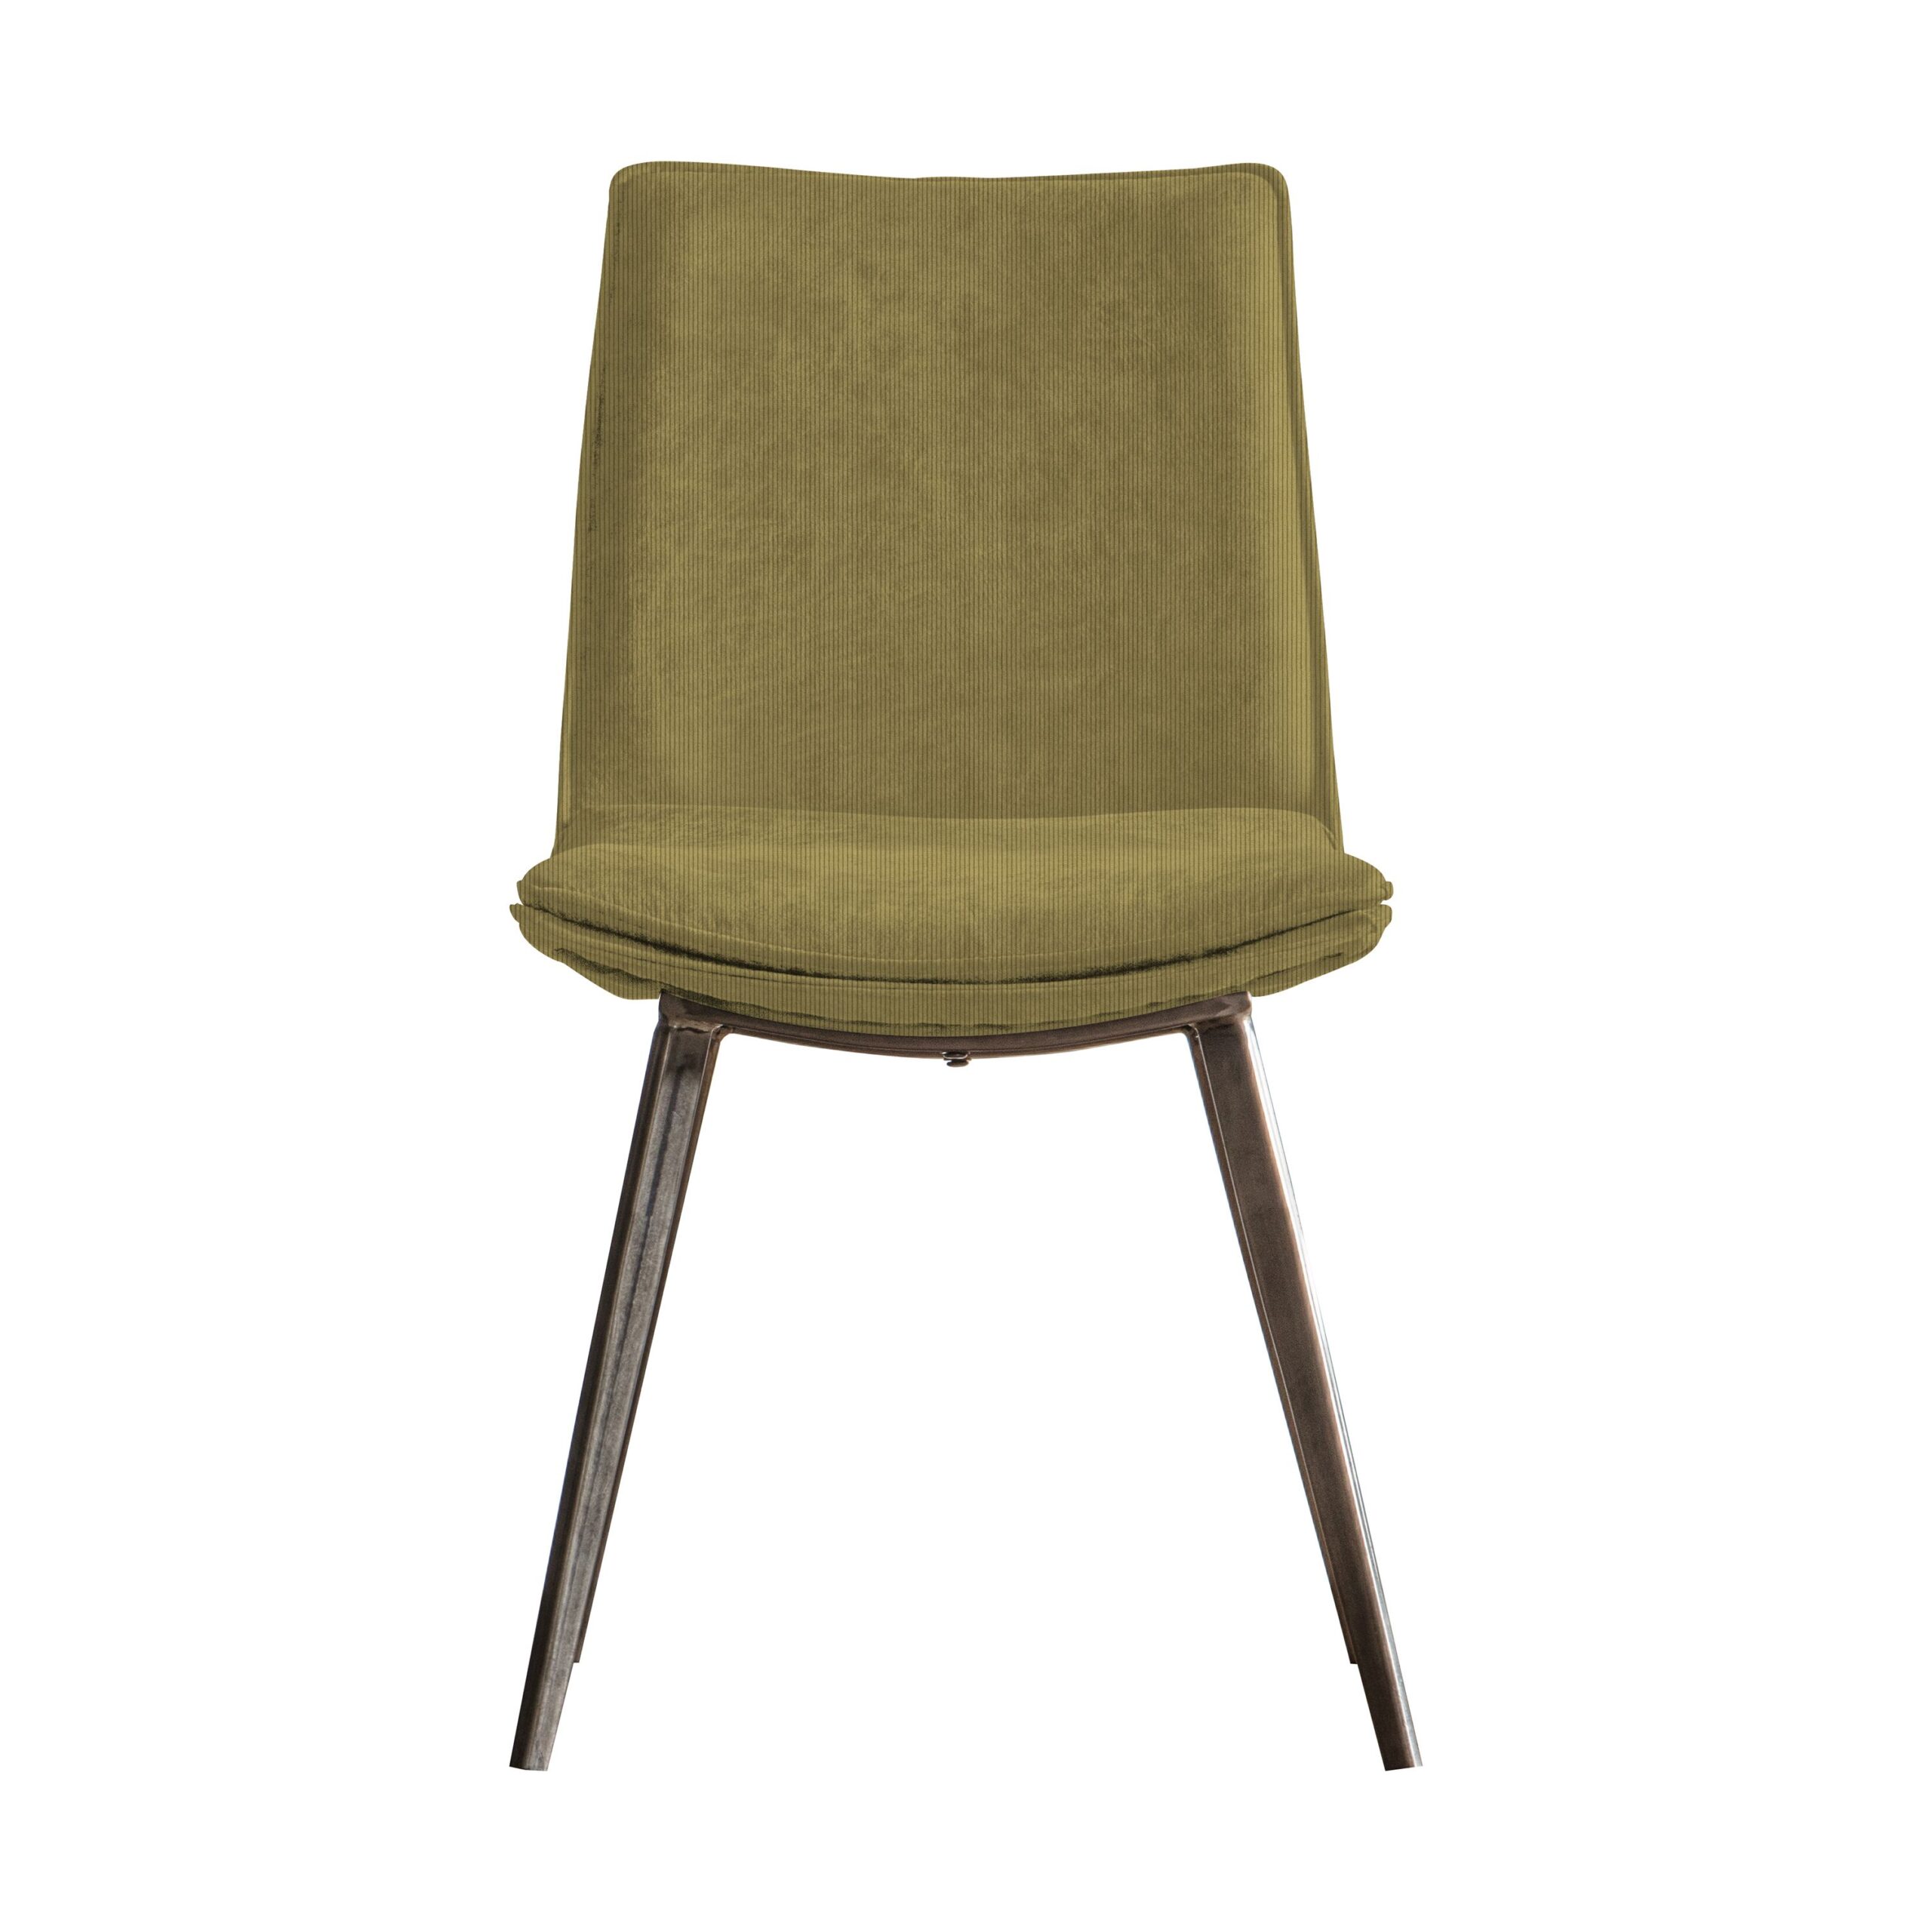 Kington Dining Chairs Pair – Choose your own fabric